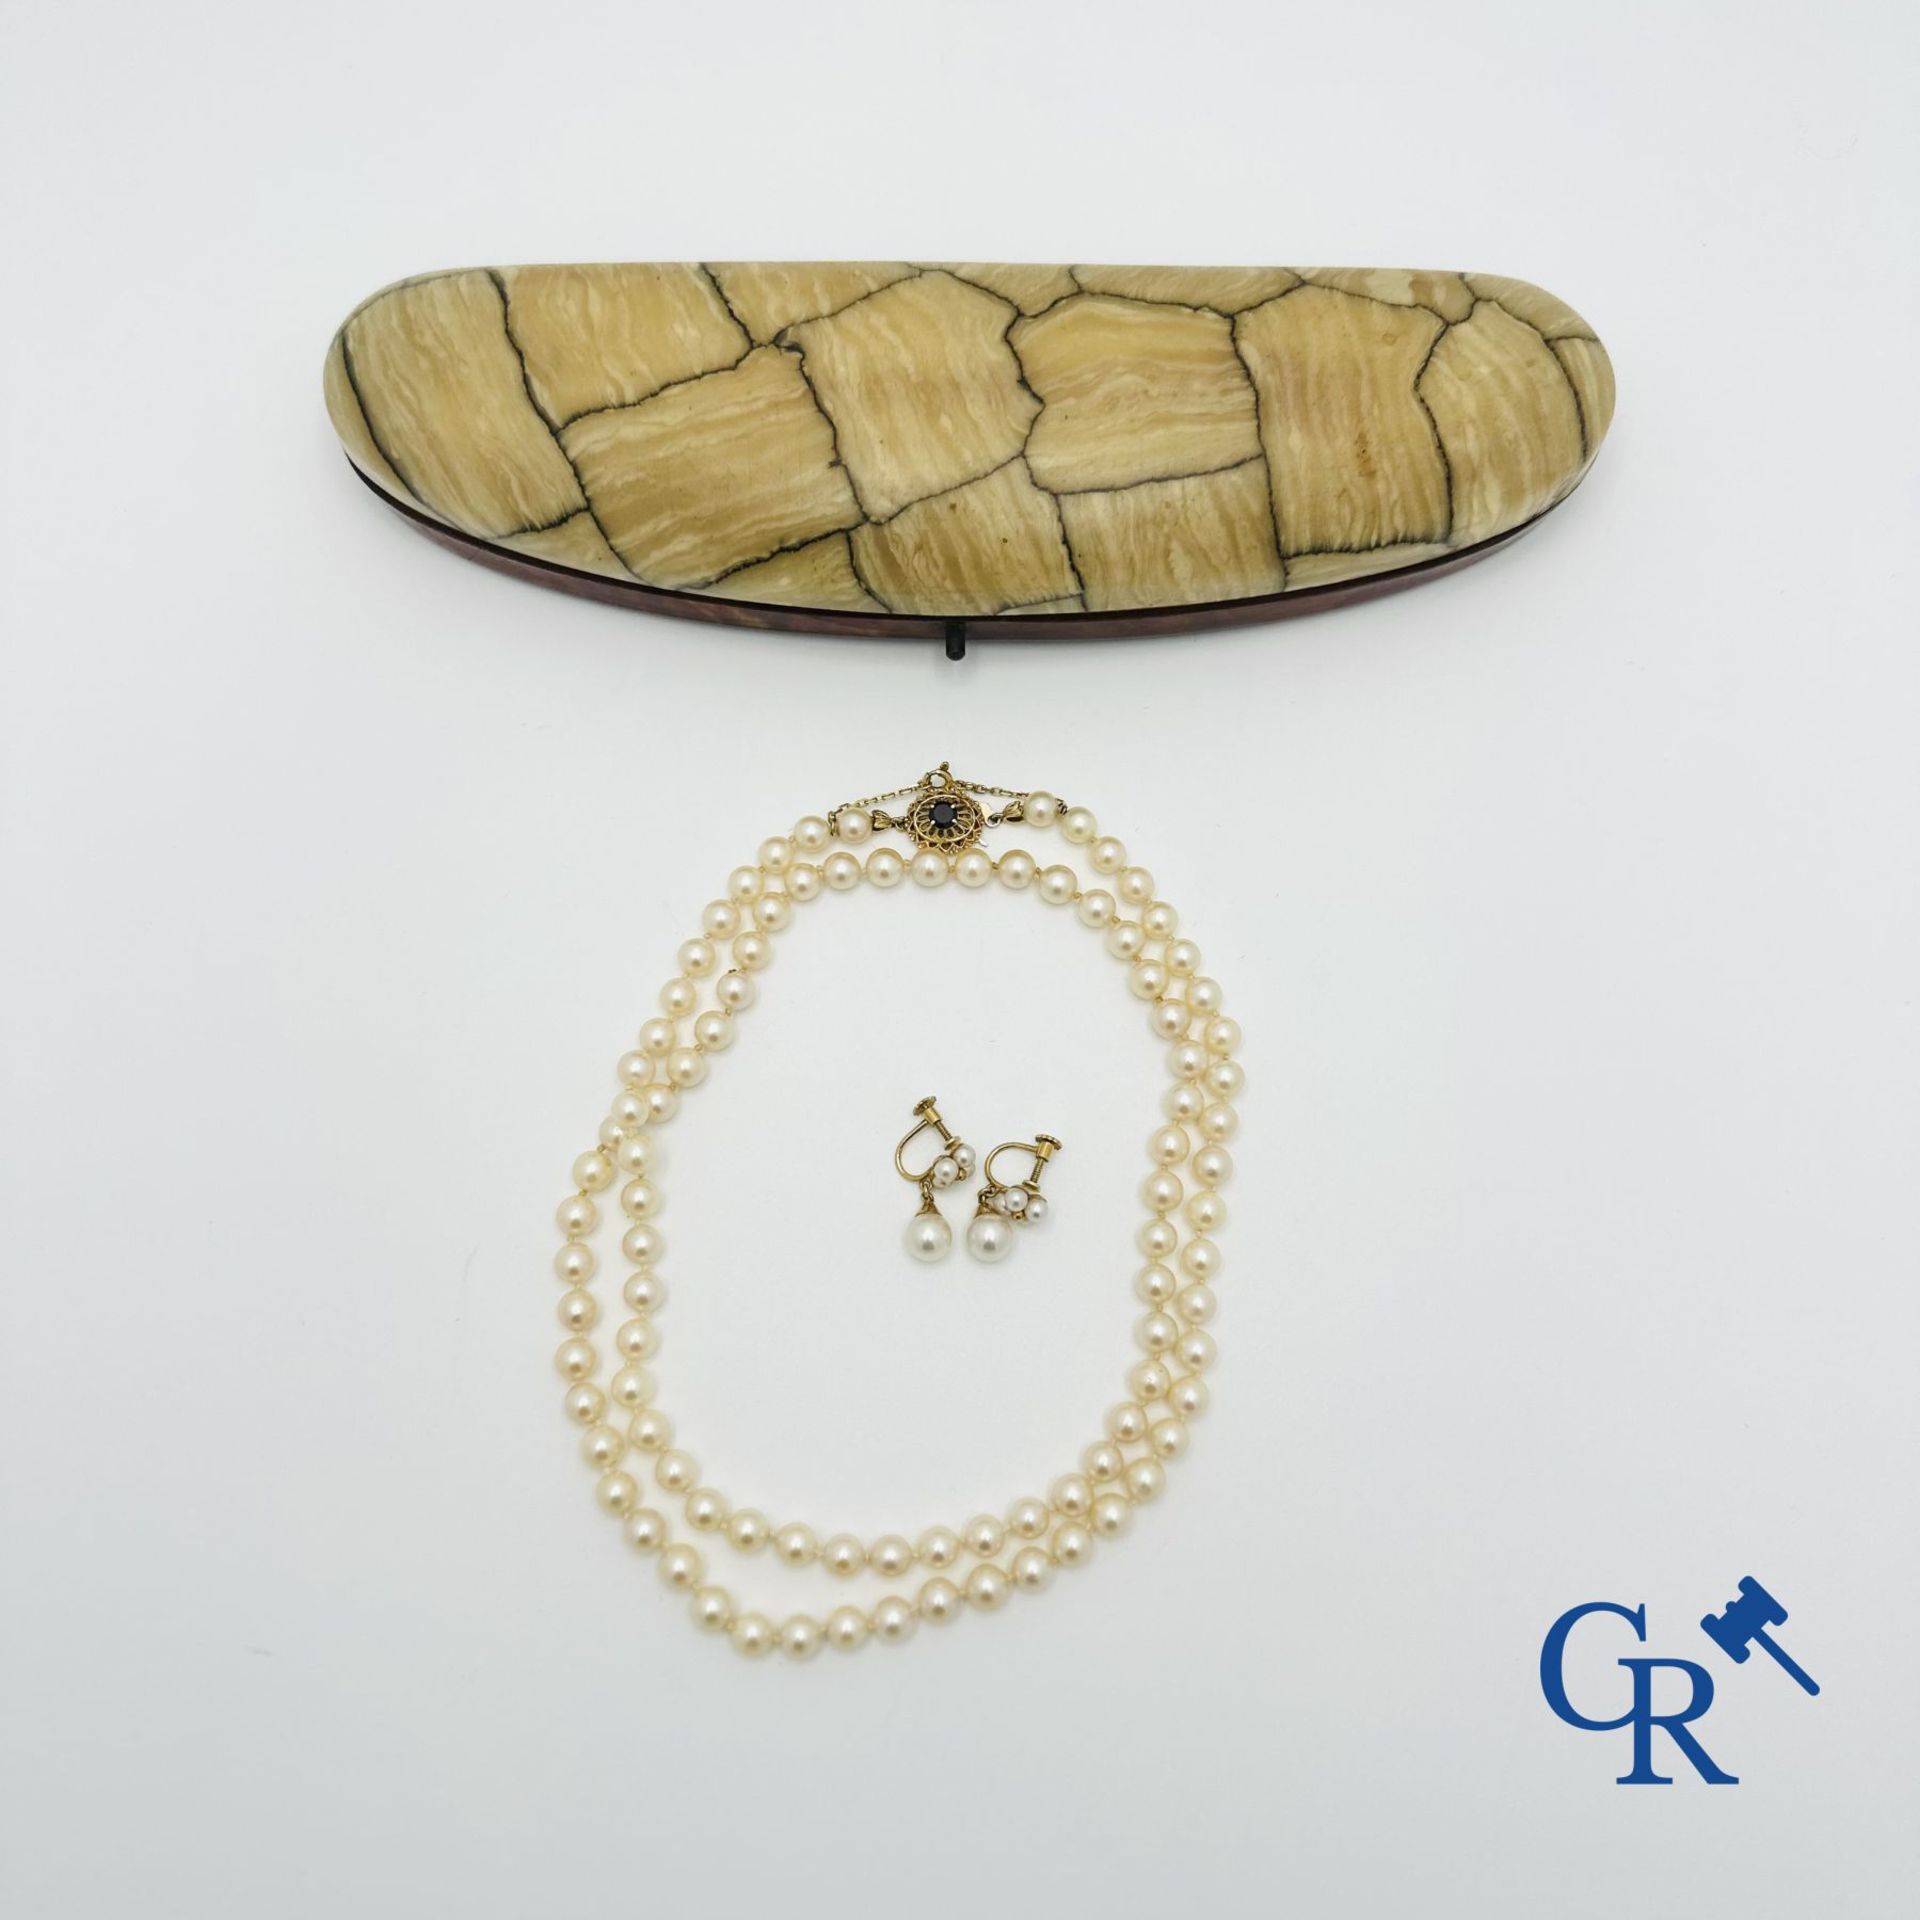 Jewellery: Lot consisting of a pearl necklace with gold clasp 18K and a pair of earrings in gold 18K - Image 6 of 6